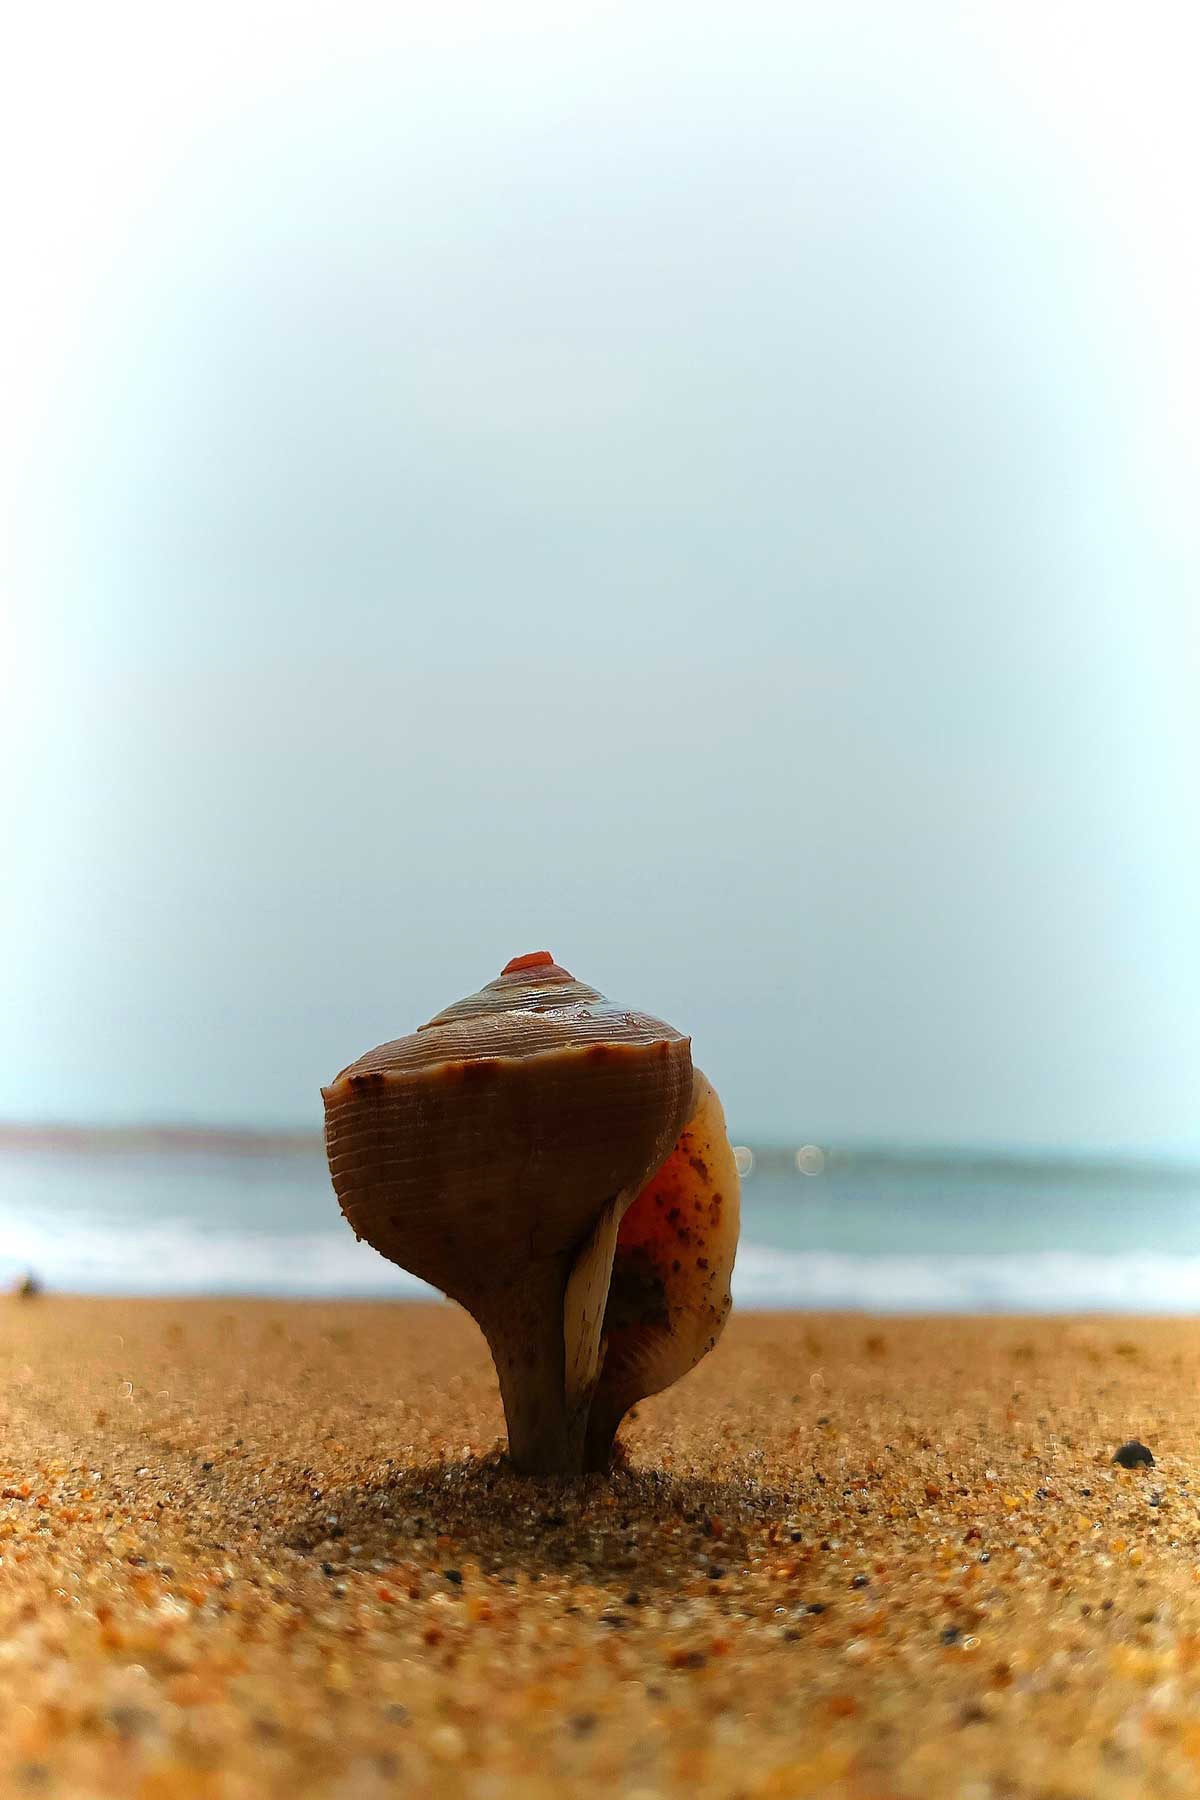 Conch on shore, digital tide approaching. Symbolizing harmony between nature and tech in computer engineering landscape.